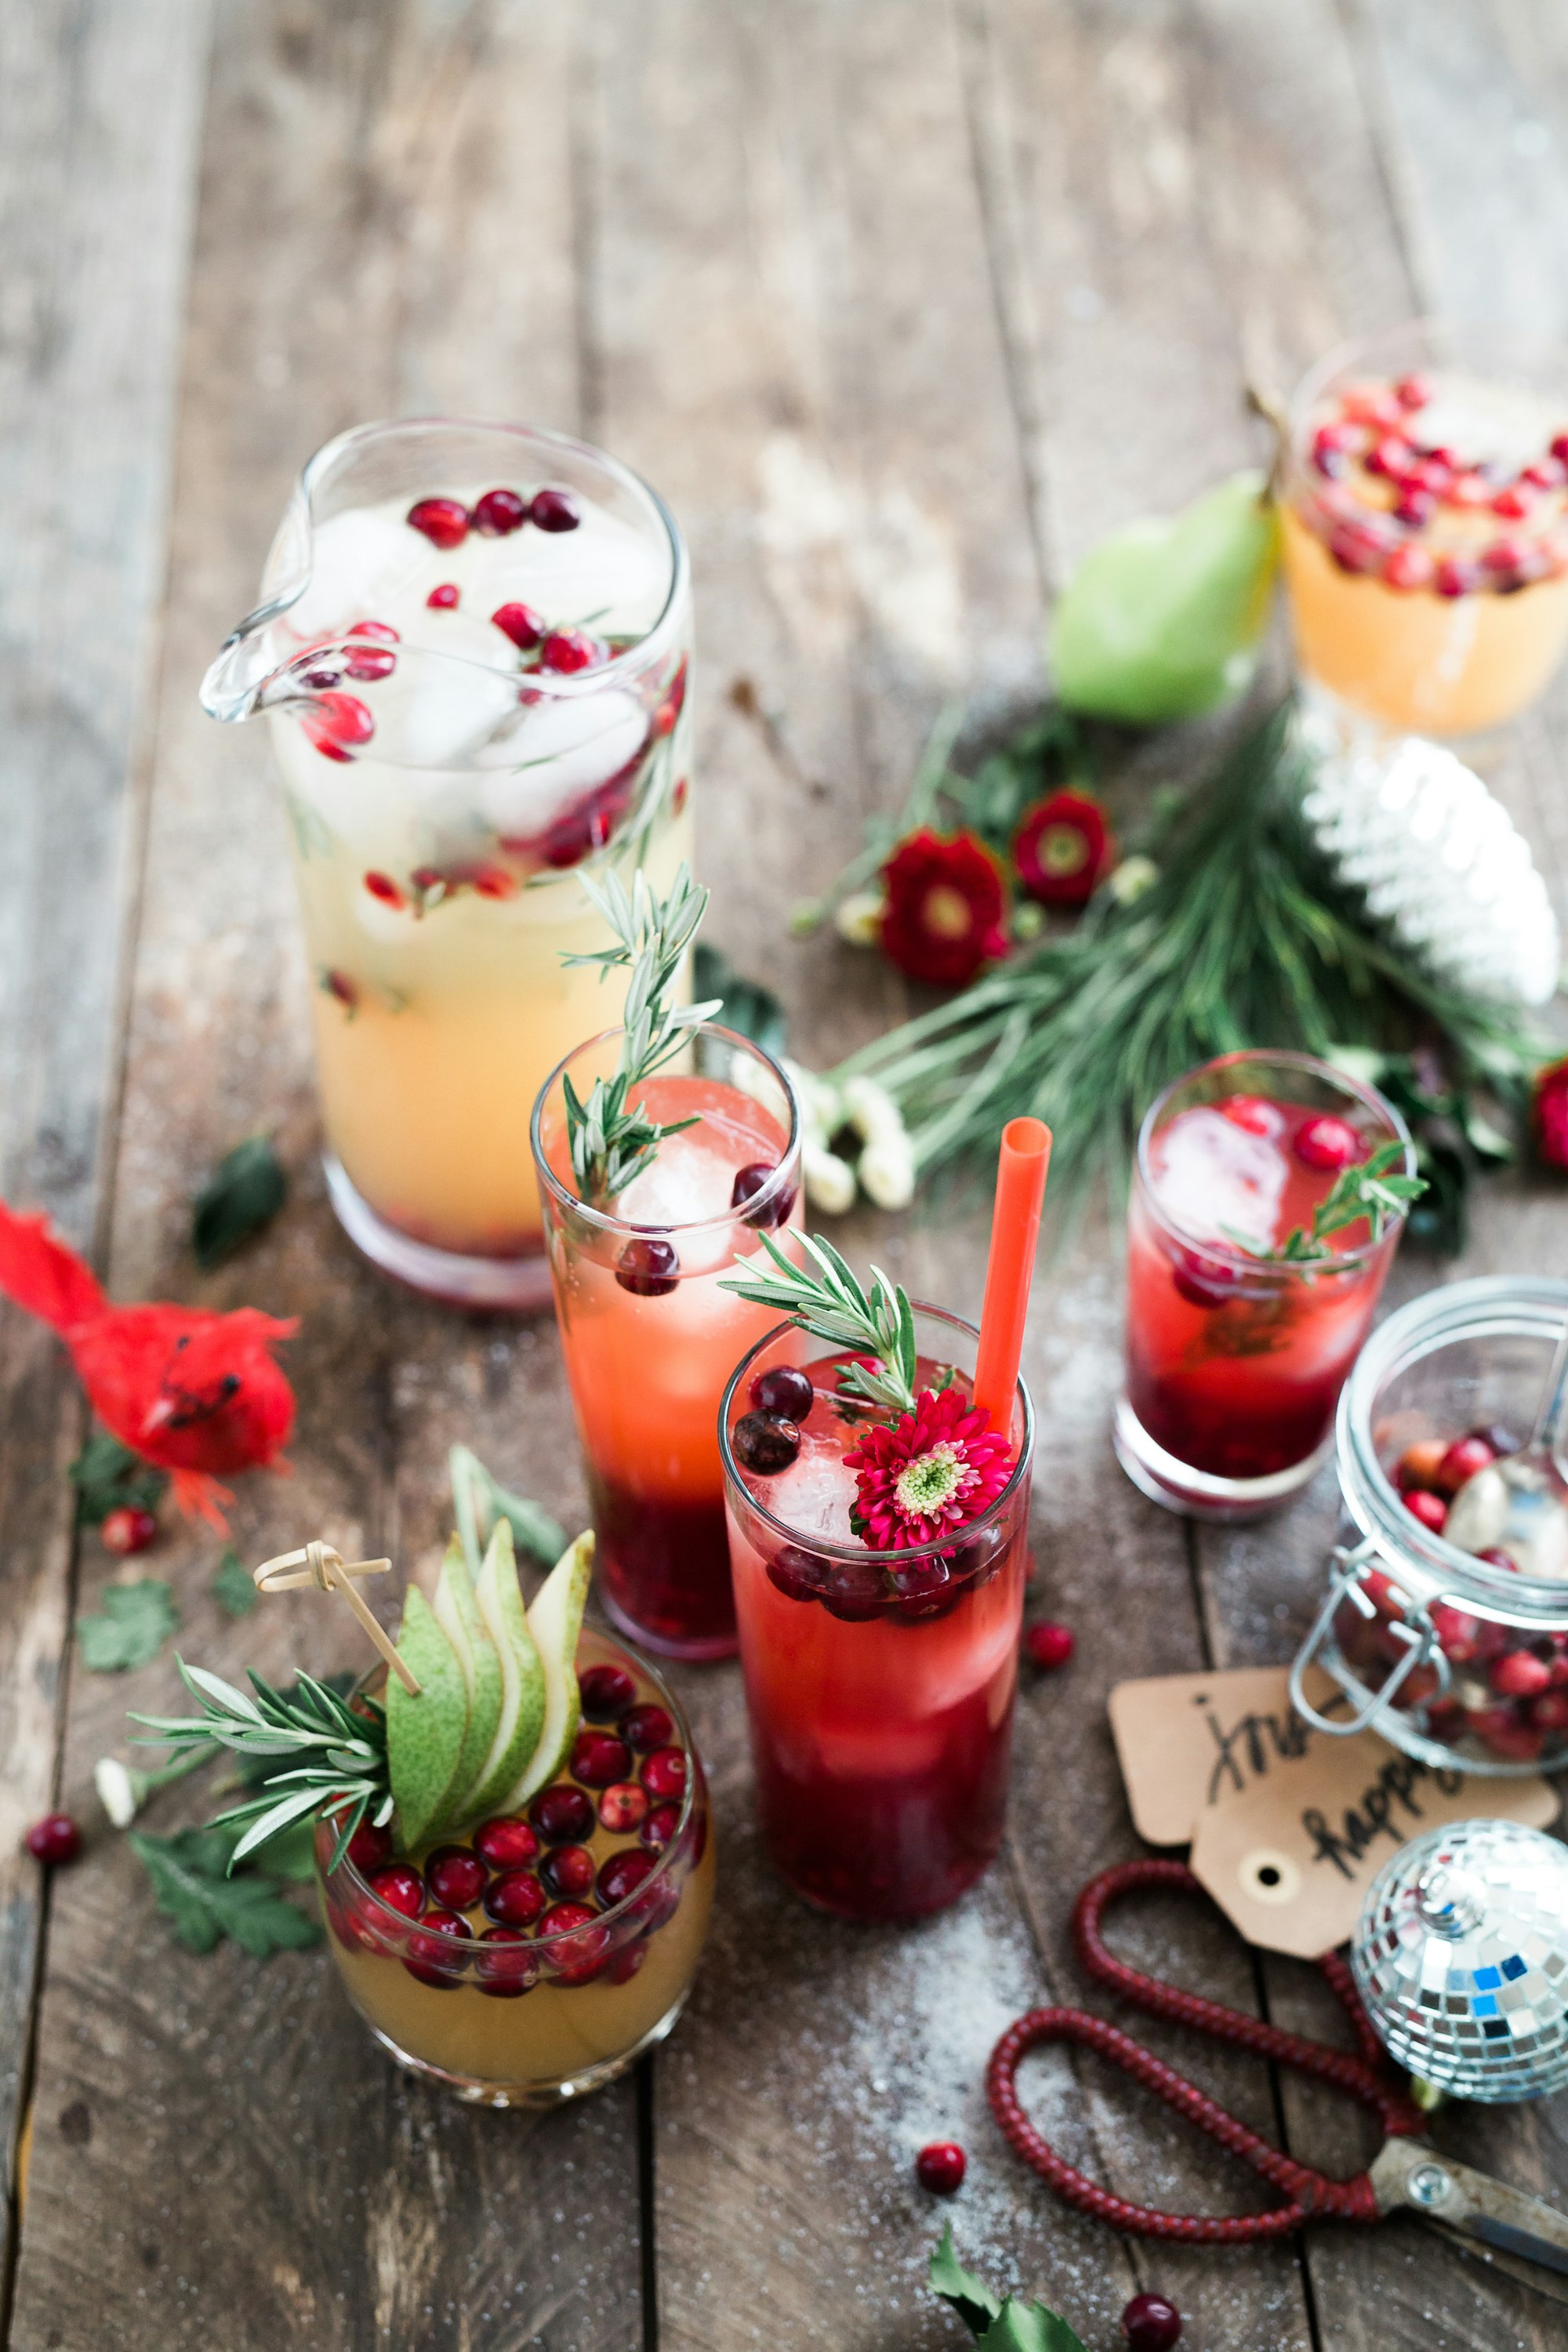 A trip home from shopping after a long day of holiday prep, and I was ready to settle in for a merry sipper. Three easy ingredients–fruit juice (pom or pear), vodka and ginger kombucha–later and we had a full table of glowy drinks. Happiest Holidays.